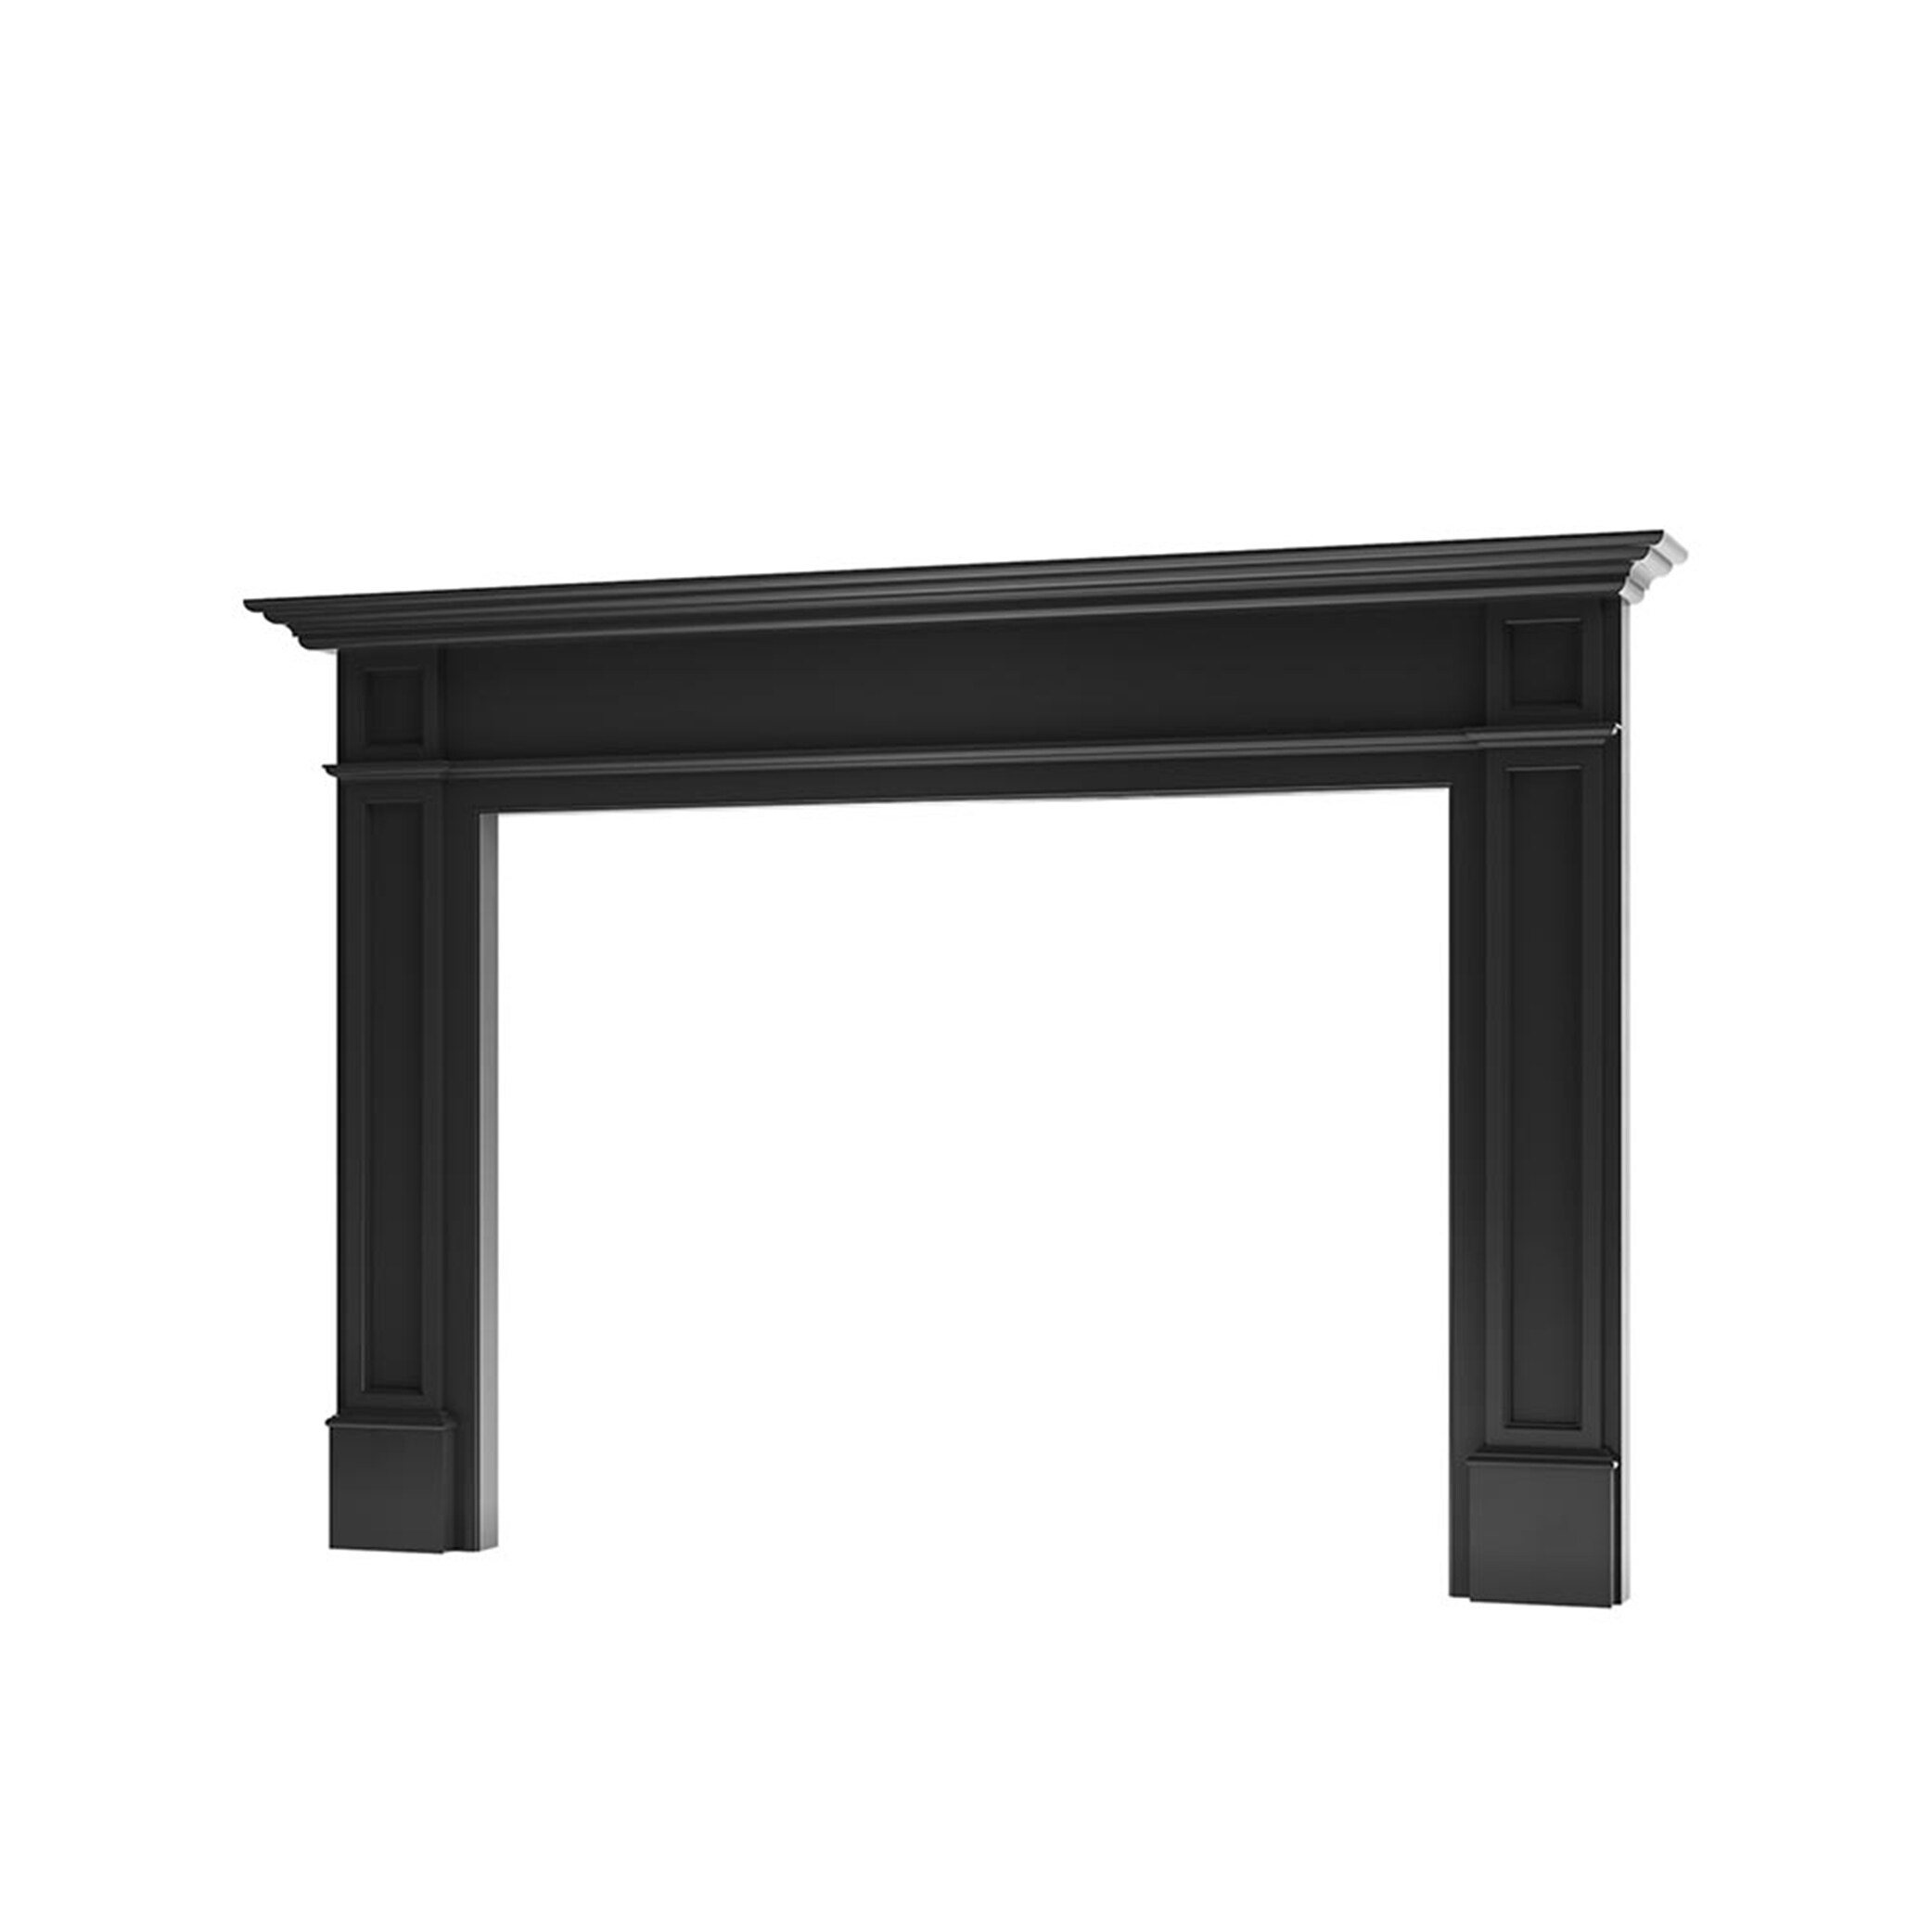 8-in at Modern in Traditional D Ember Fireplace Fireplace W 54-in 72-in x Poplar H Black department the Mantels x Mantel